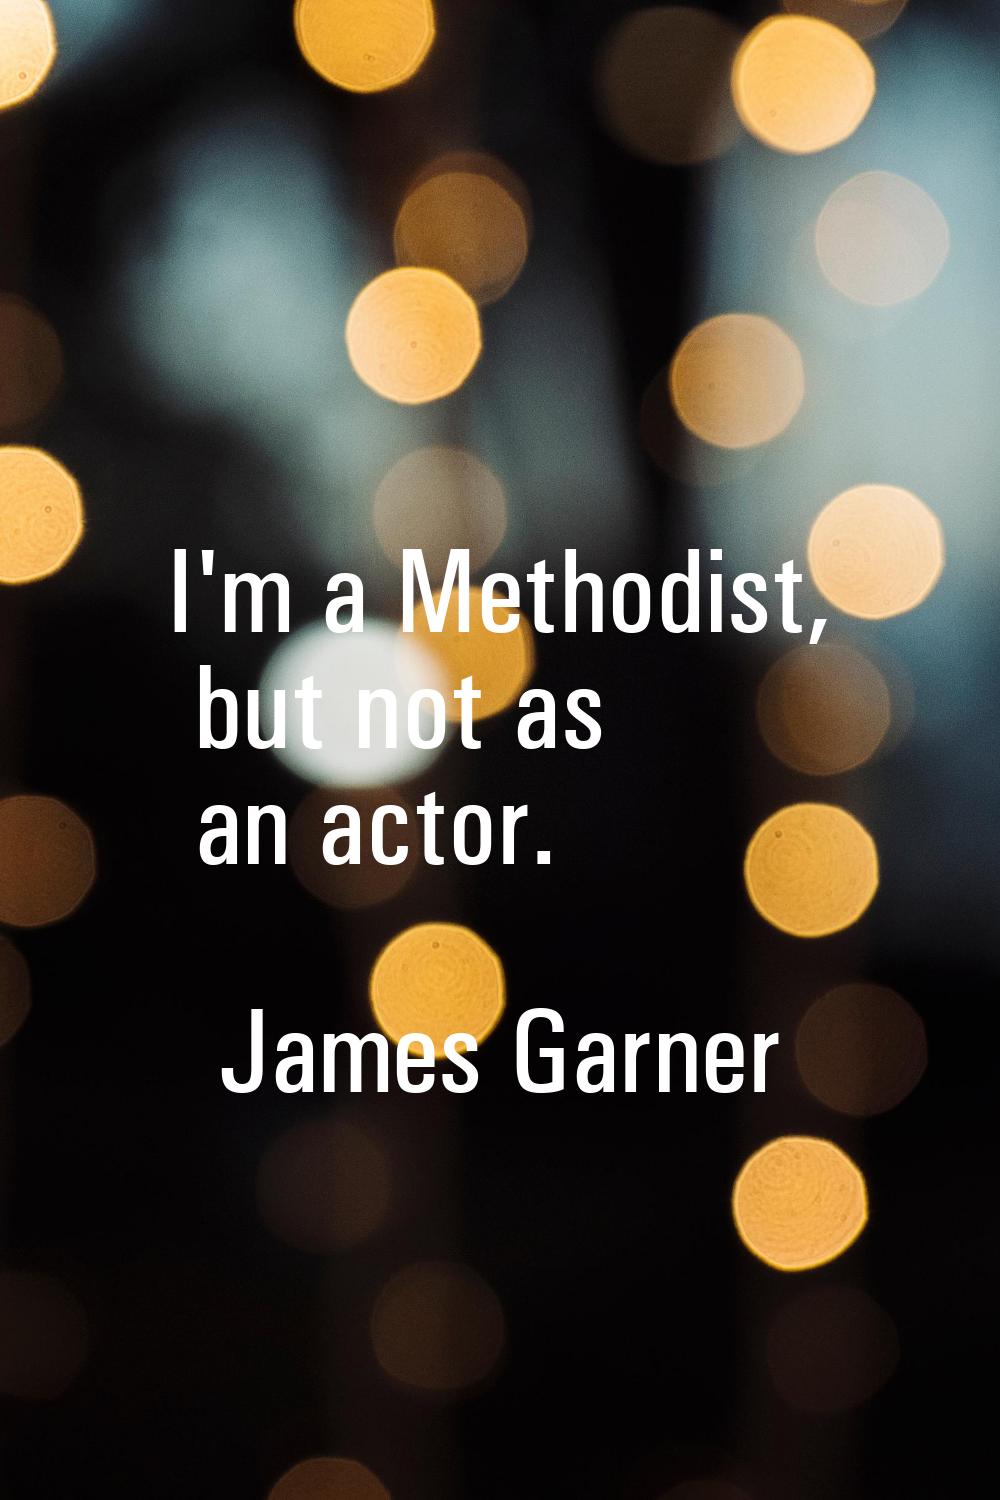 I'm a Methodist, but not as an actor.